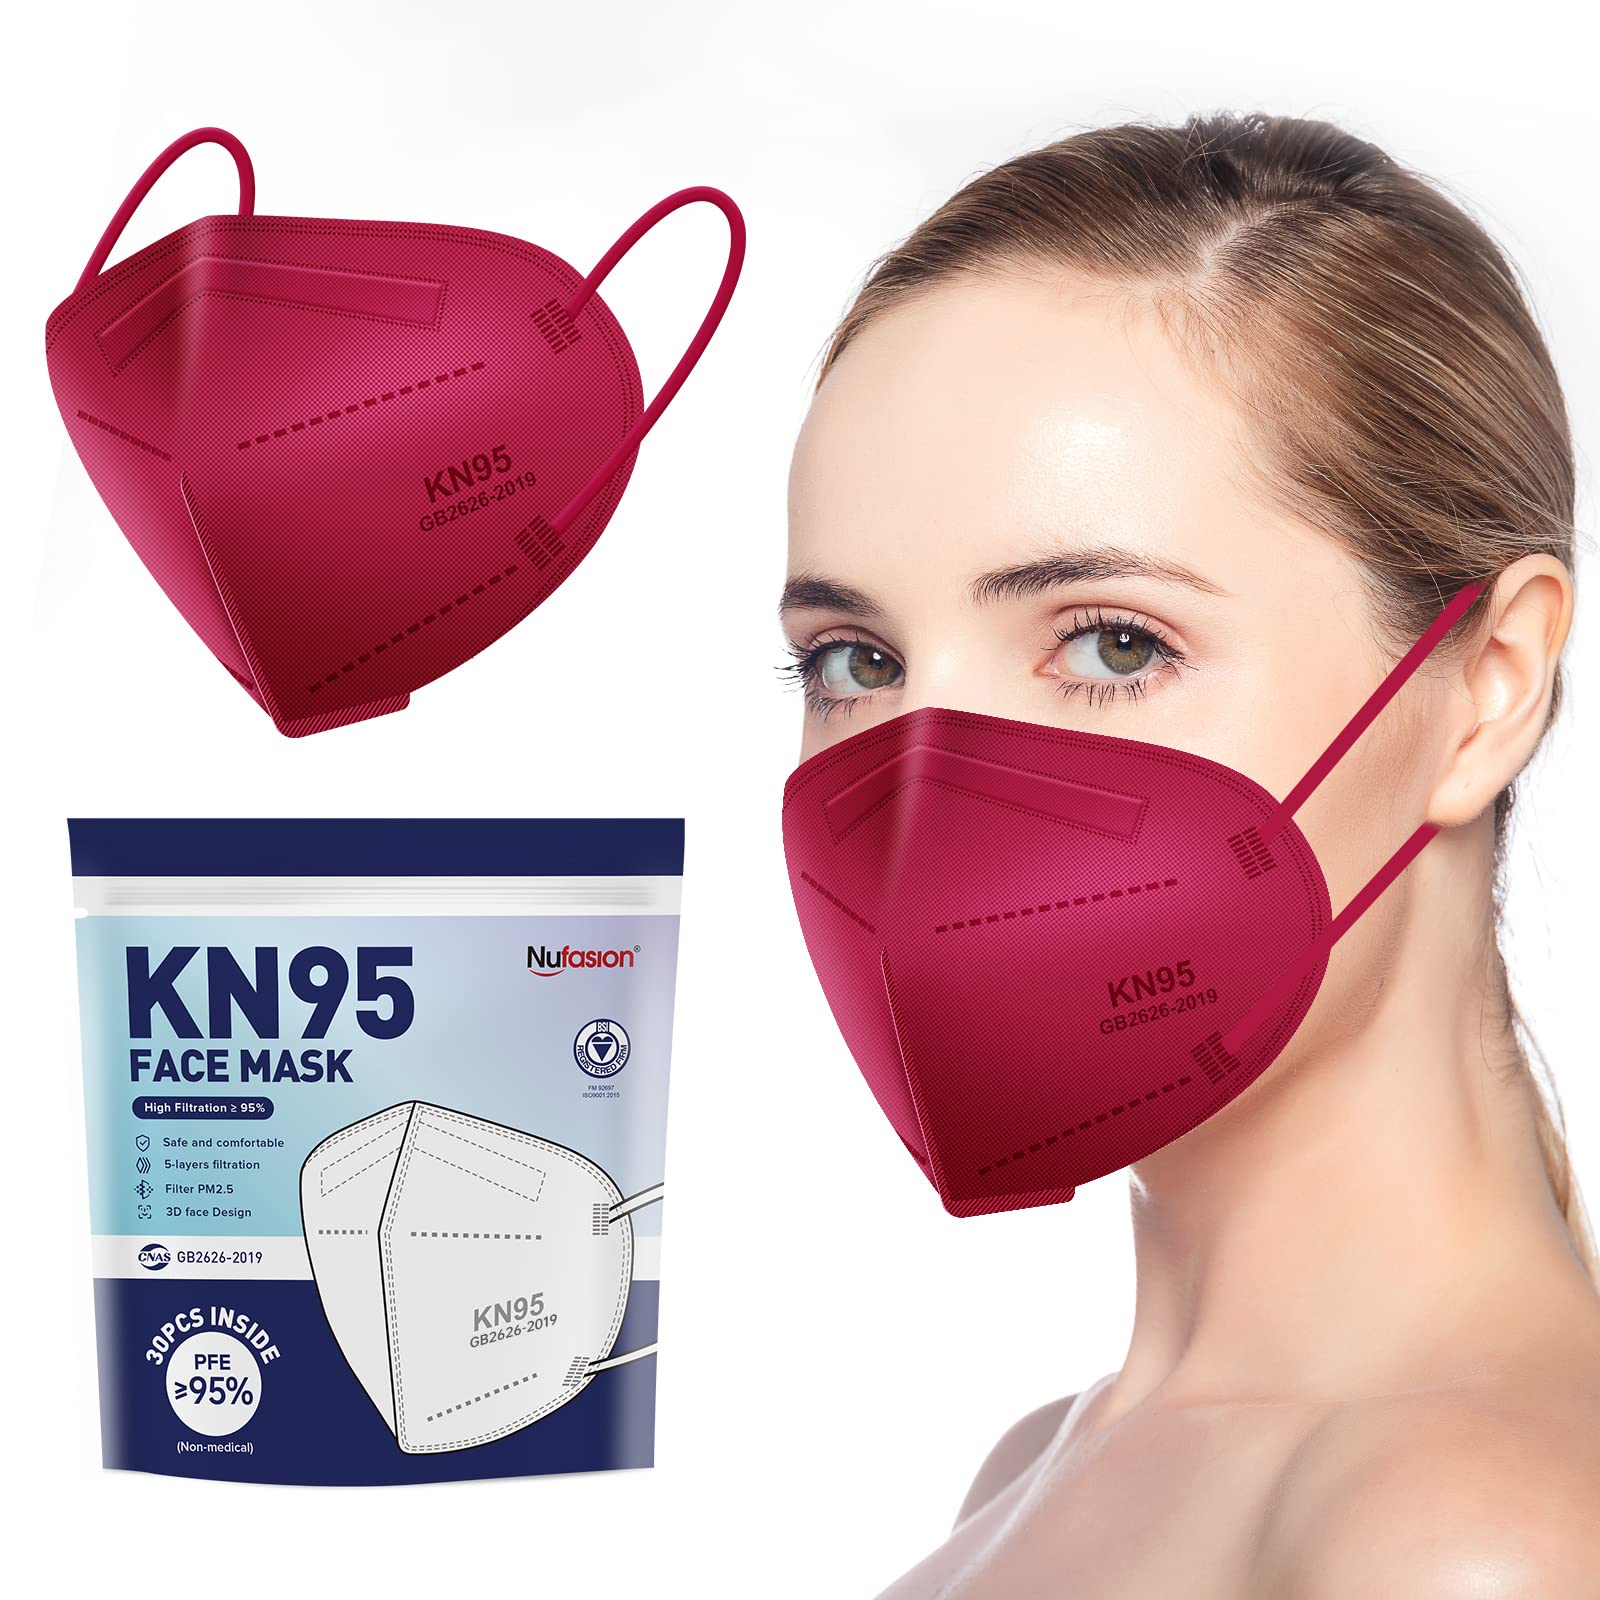 Nufasion KN95 Face Masks for Adults - 30pcs cup Safety Disposable KN95 Masks Breathable 5-Layer Filtration rate =95% comfortable